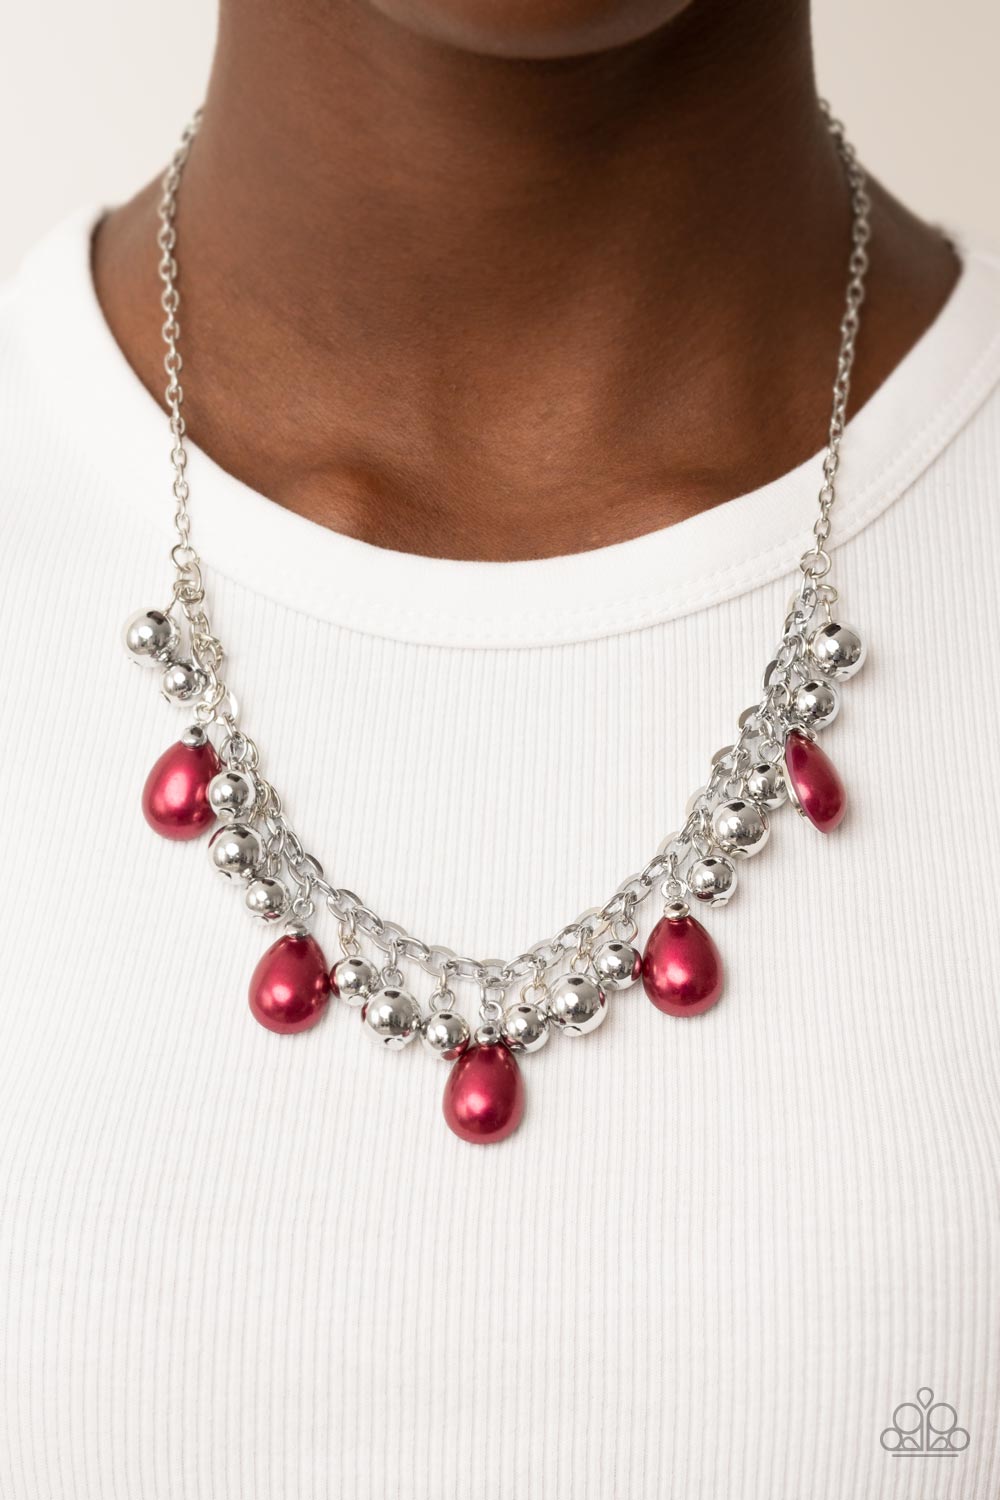 Party Favor - Red Pearls & Silver Beaded Paparazzi Necklace &. matching earrings